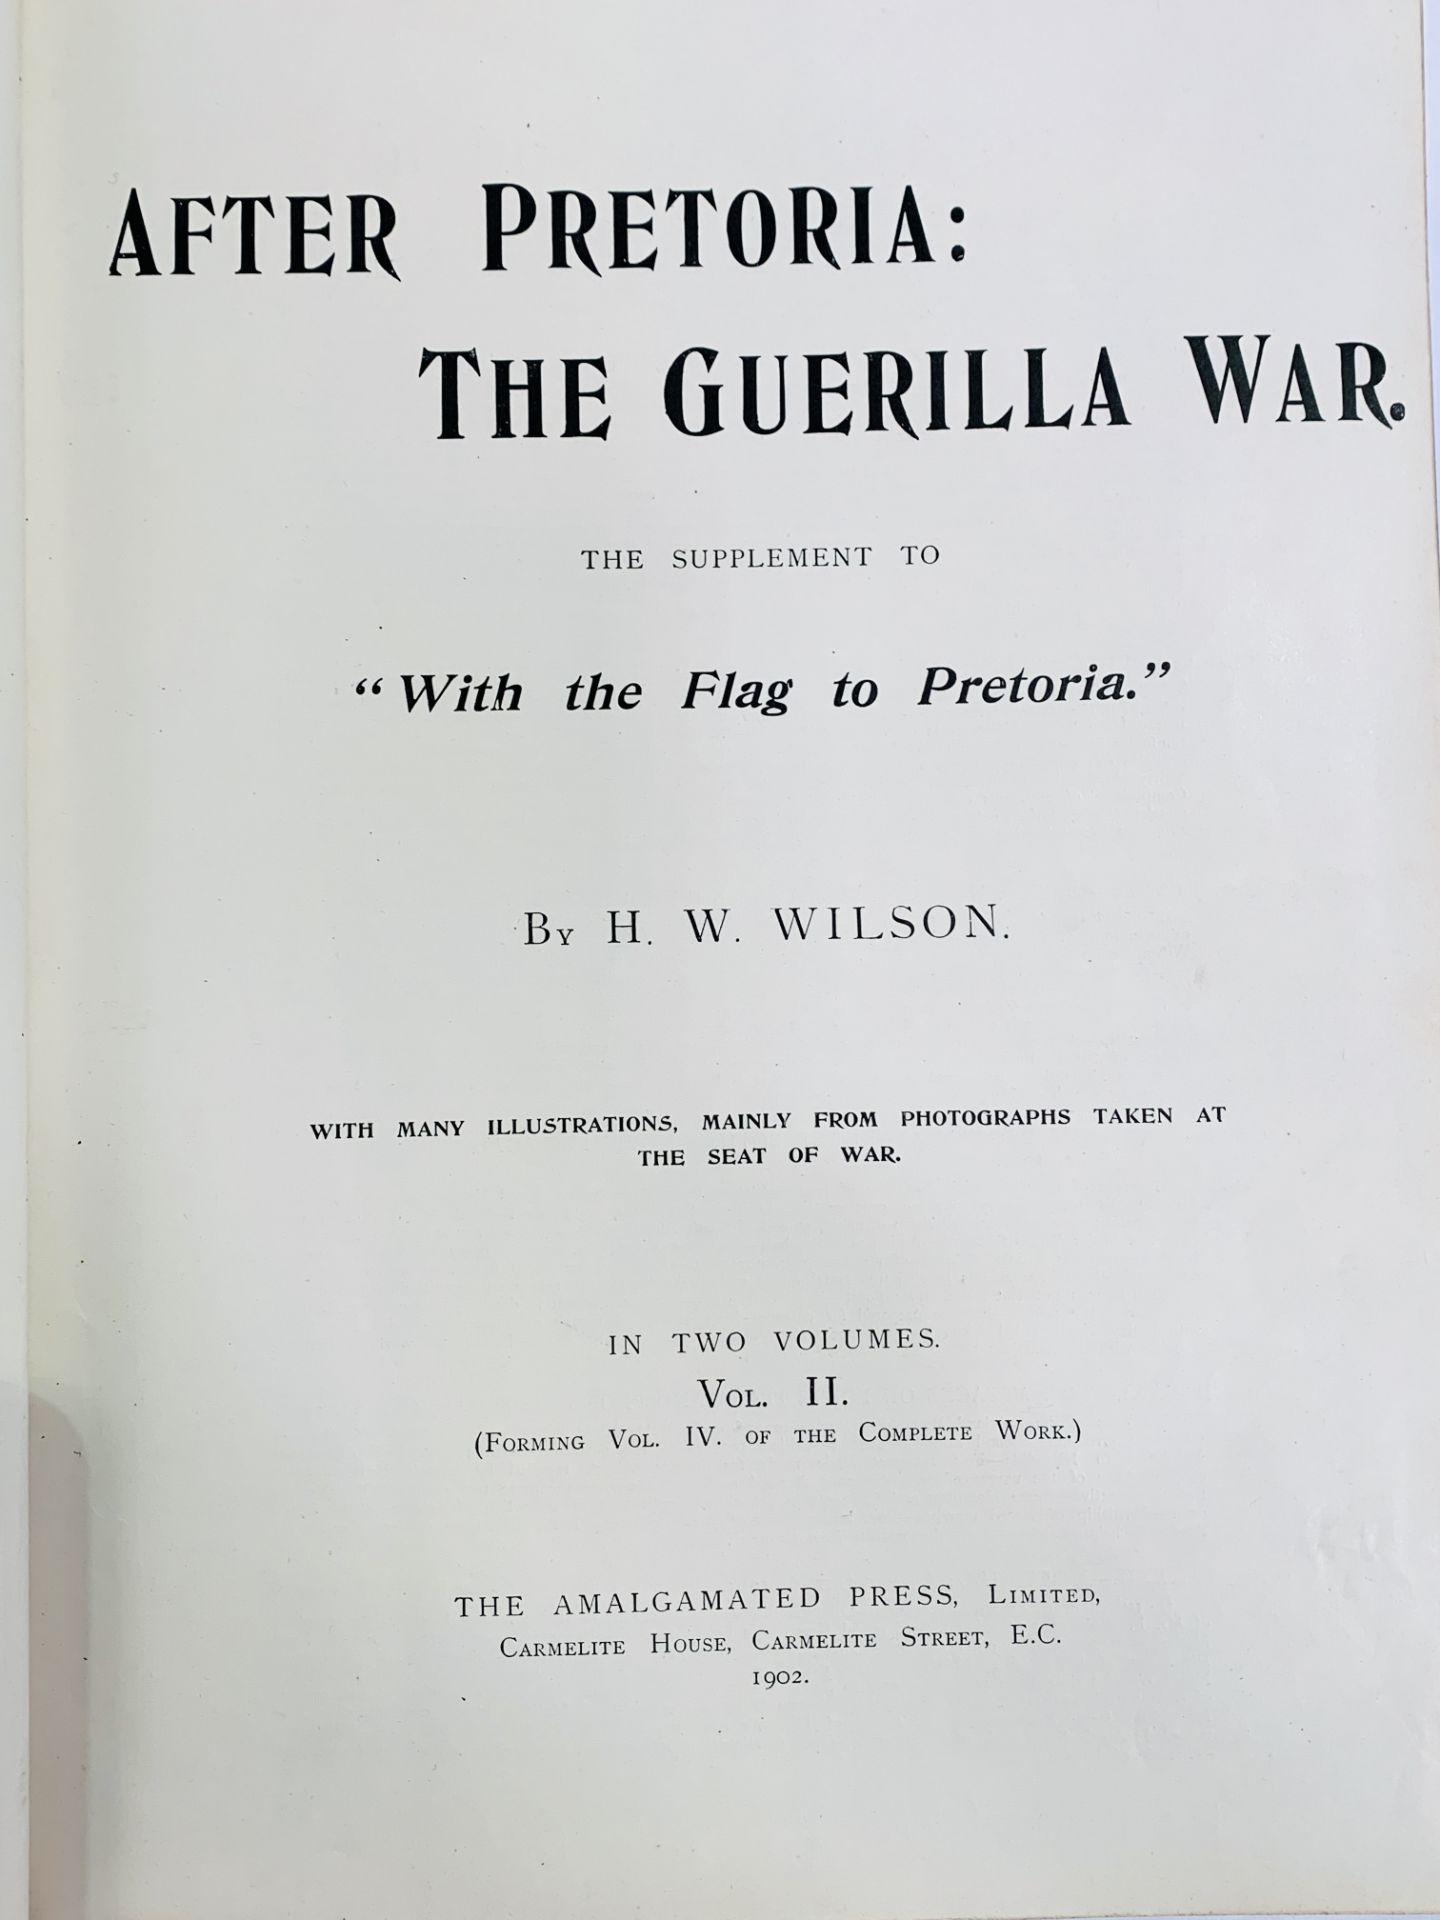 With the Flag to Pretoria and After Pretoria by HW Wilson 1900-1902 - Image 4 of 5